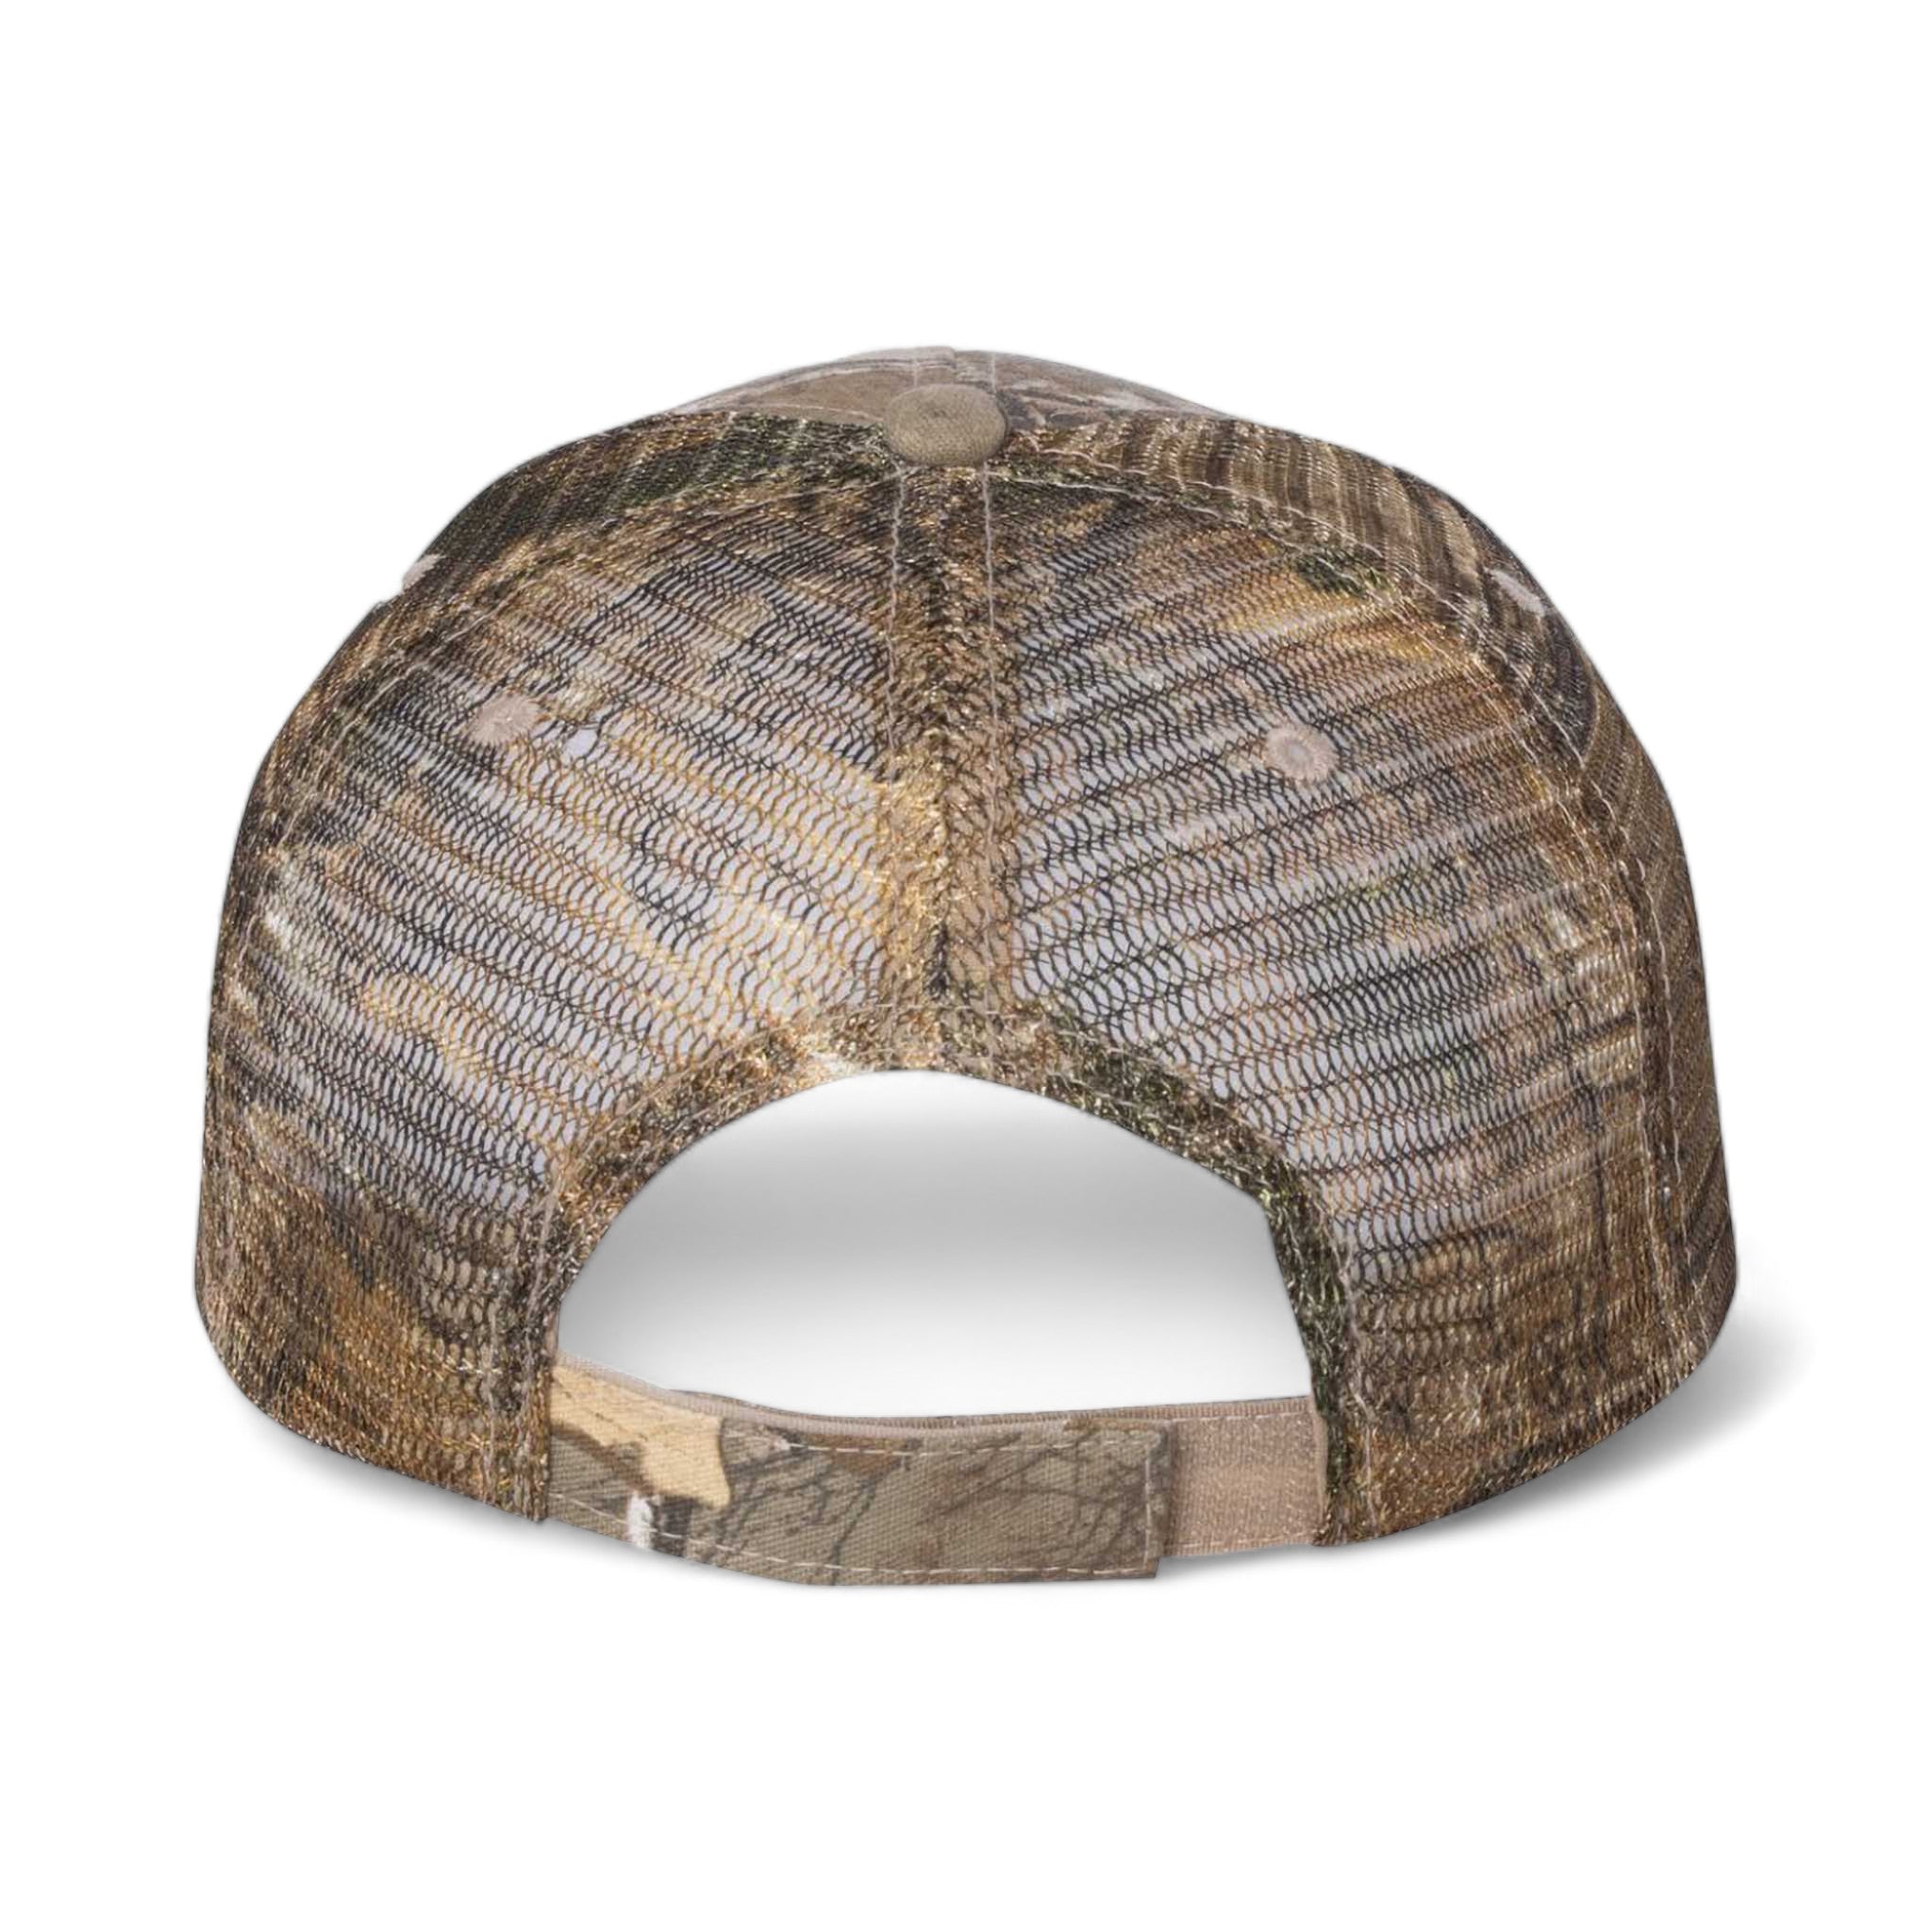 Back view of Kati LC5M custom hat in realtree xtra